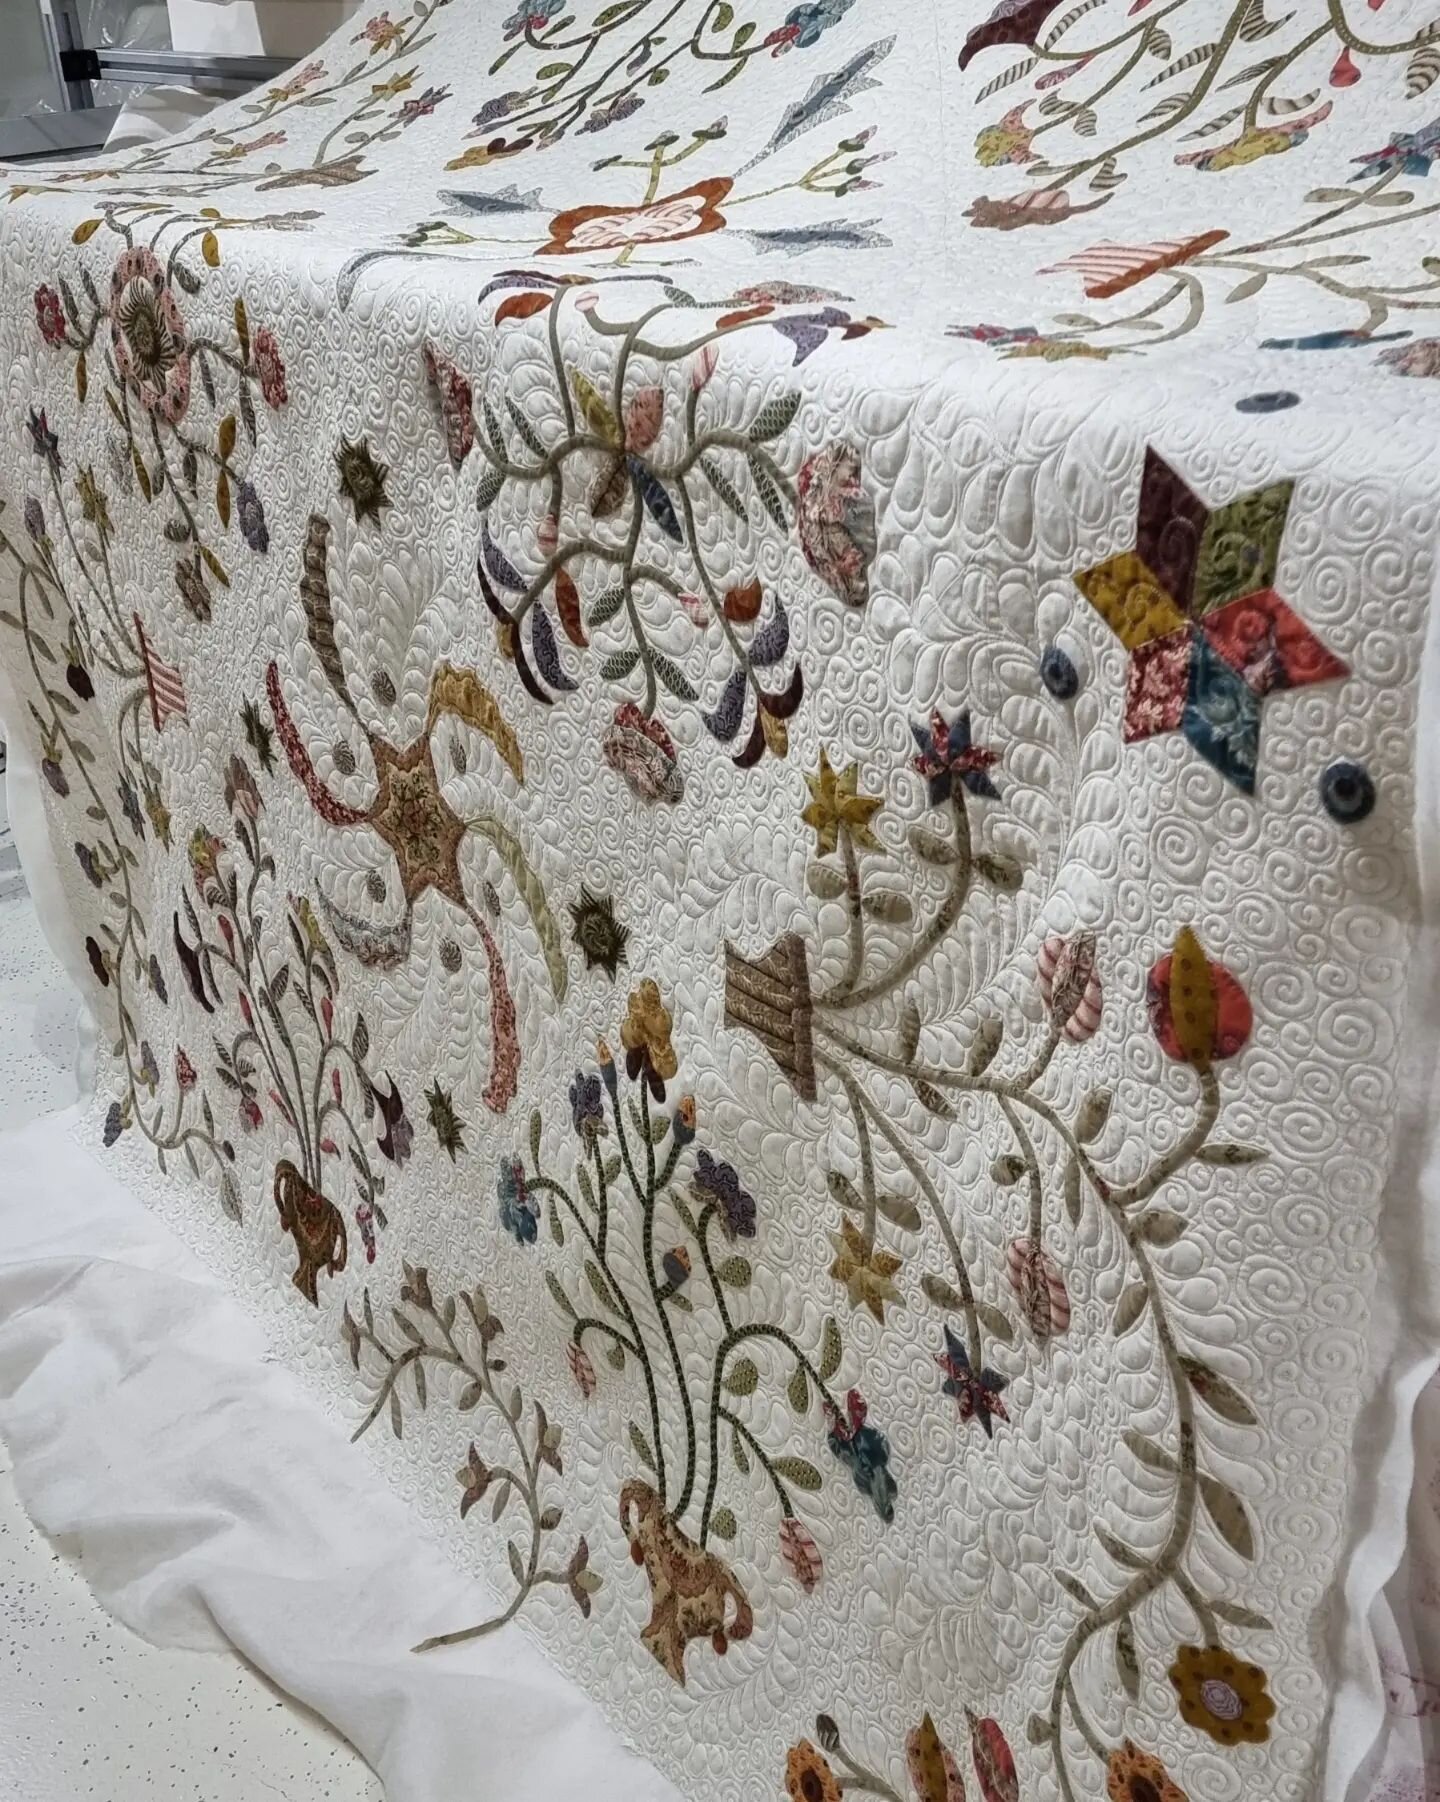 This beauty headed home yesterday with her owner very happy owner @instaquilt ....
This quilt will be making it's way to England as a Wedding gift... I'm sure the newly-weds will love it.... !!!!